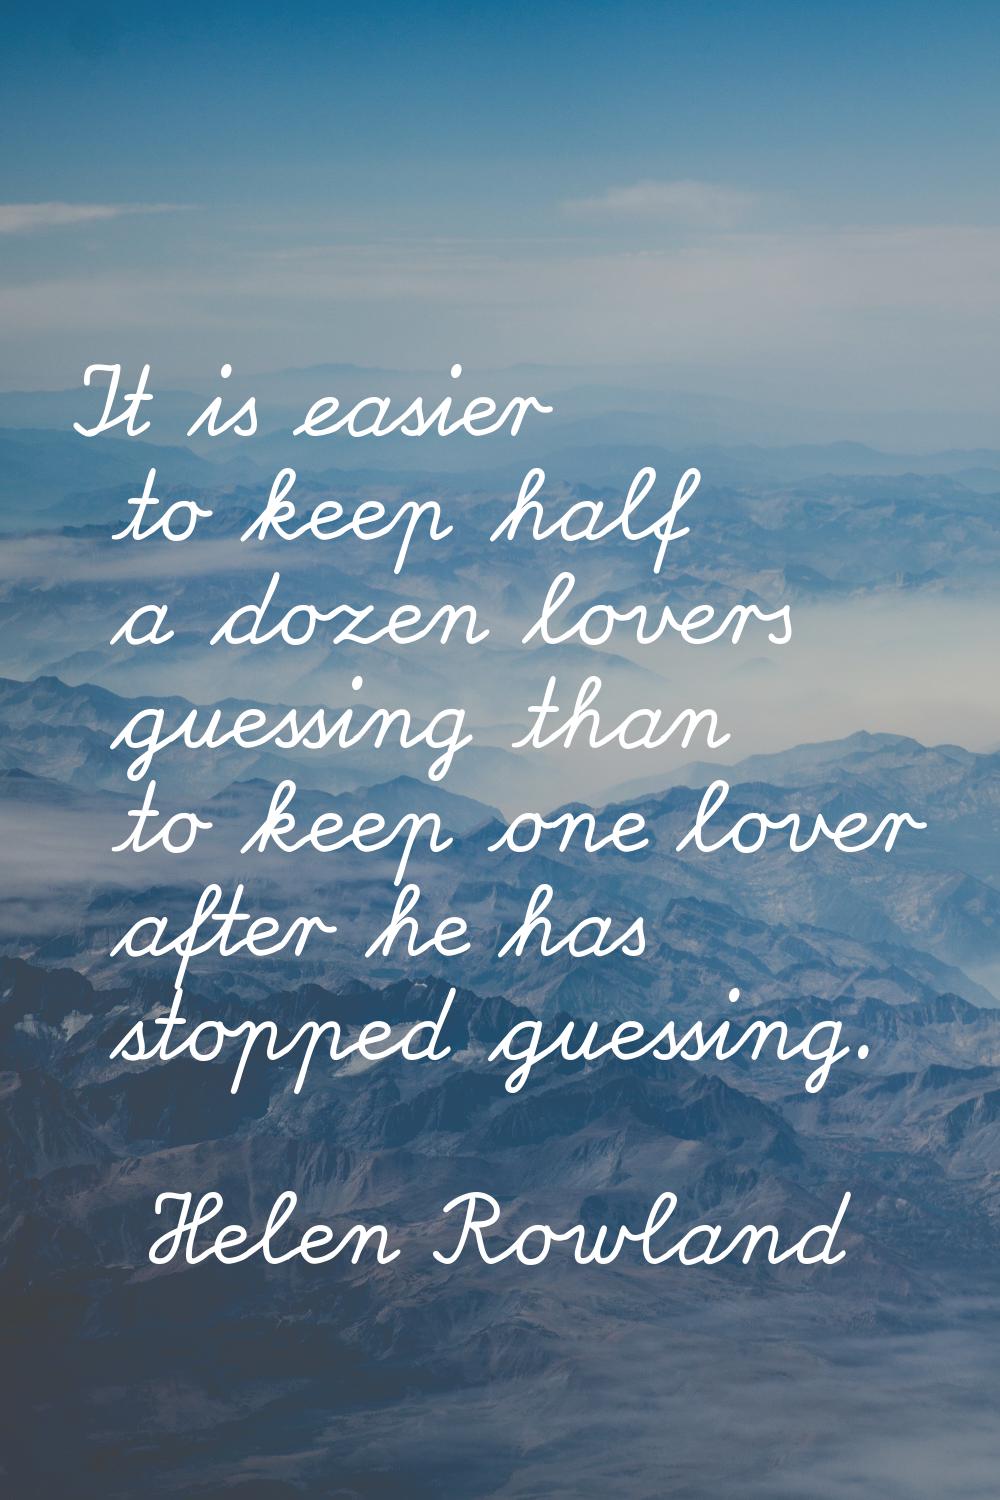 It is easier to keep half a dozen lovers guessing than to keep one lover after he has stopped guess